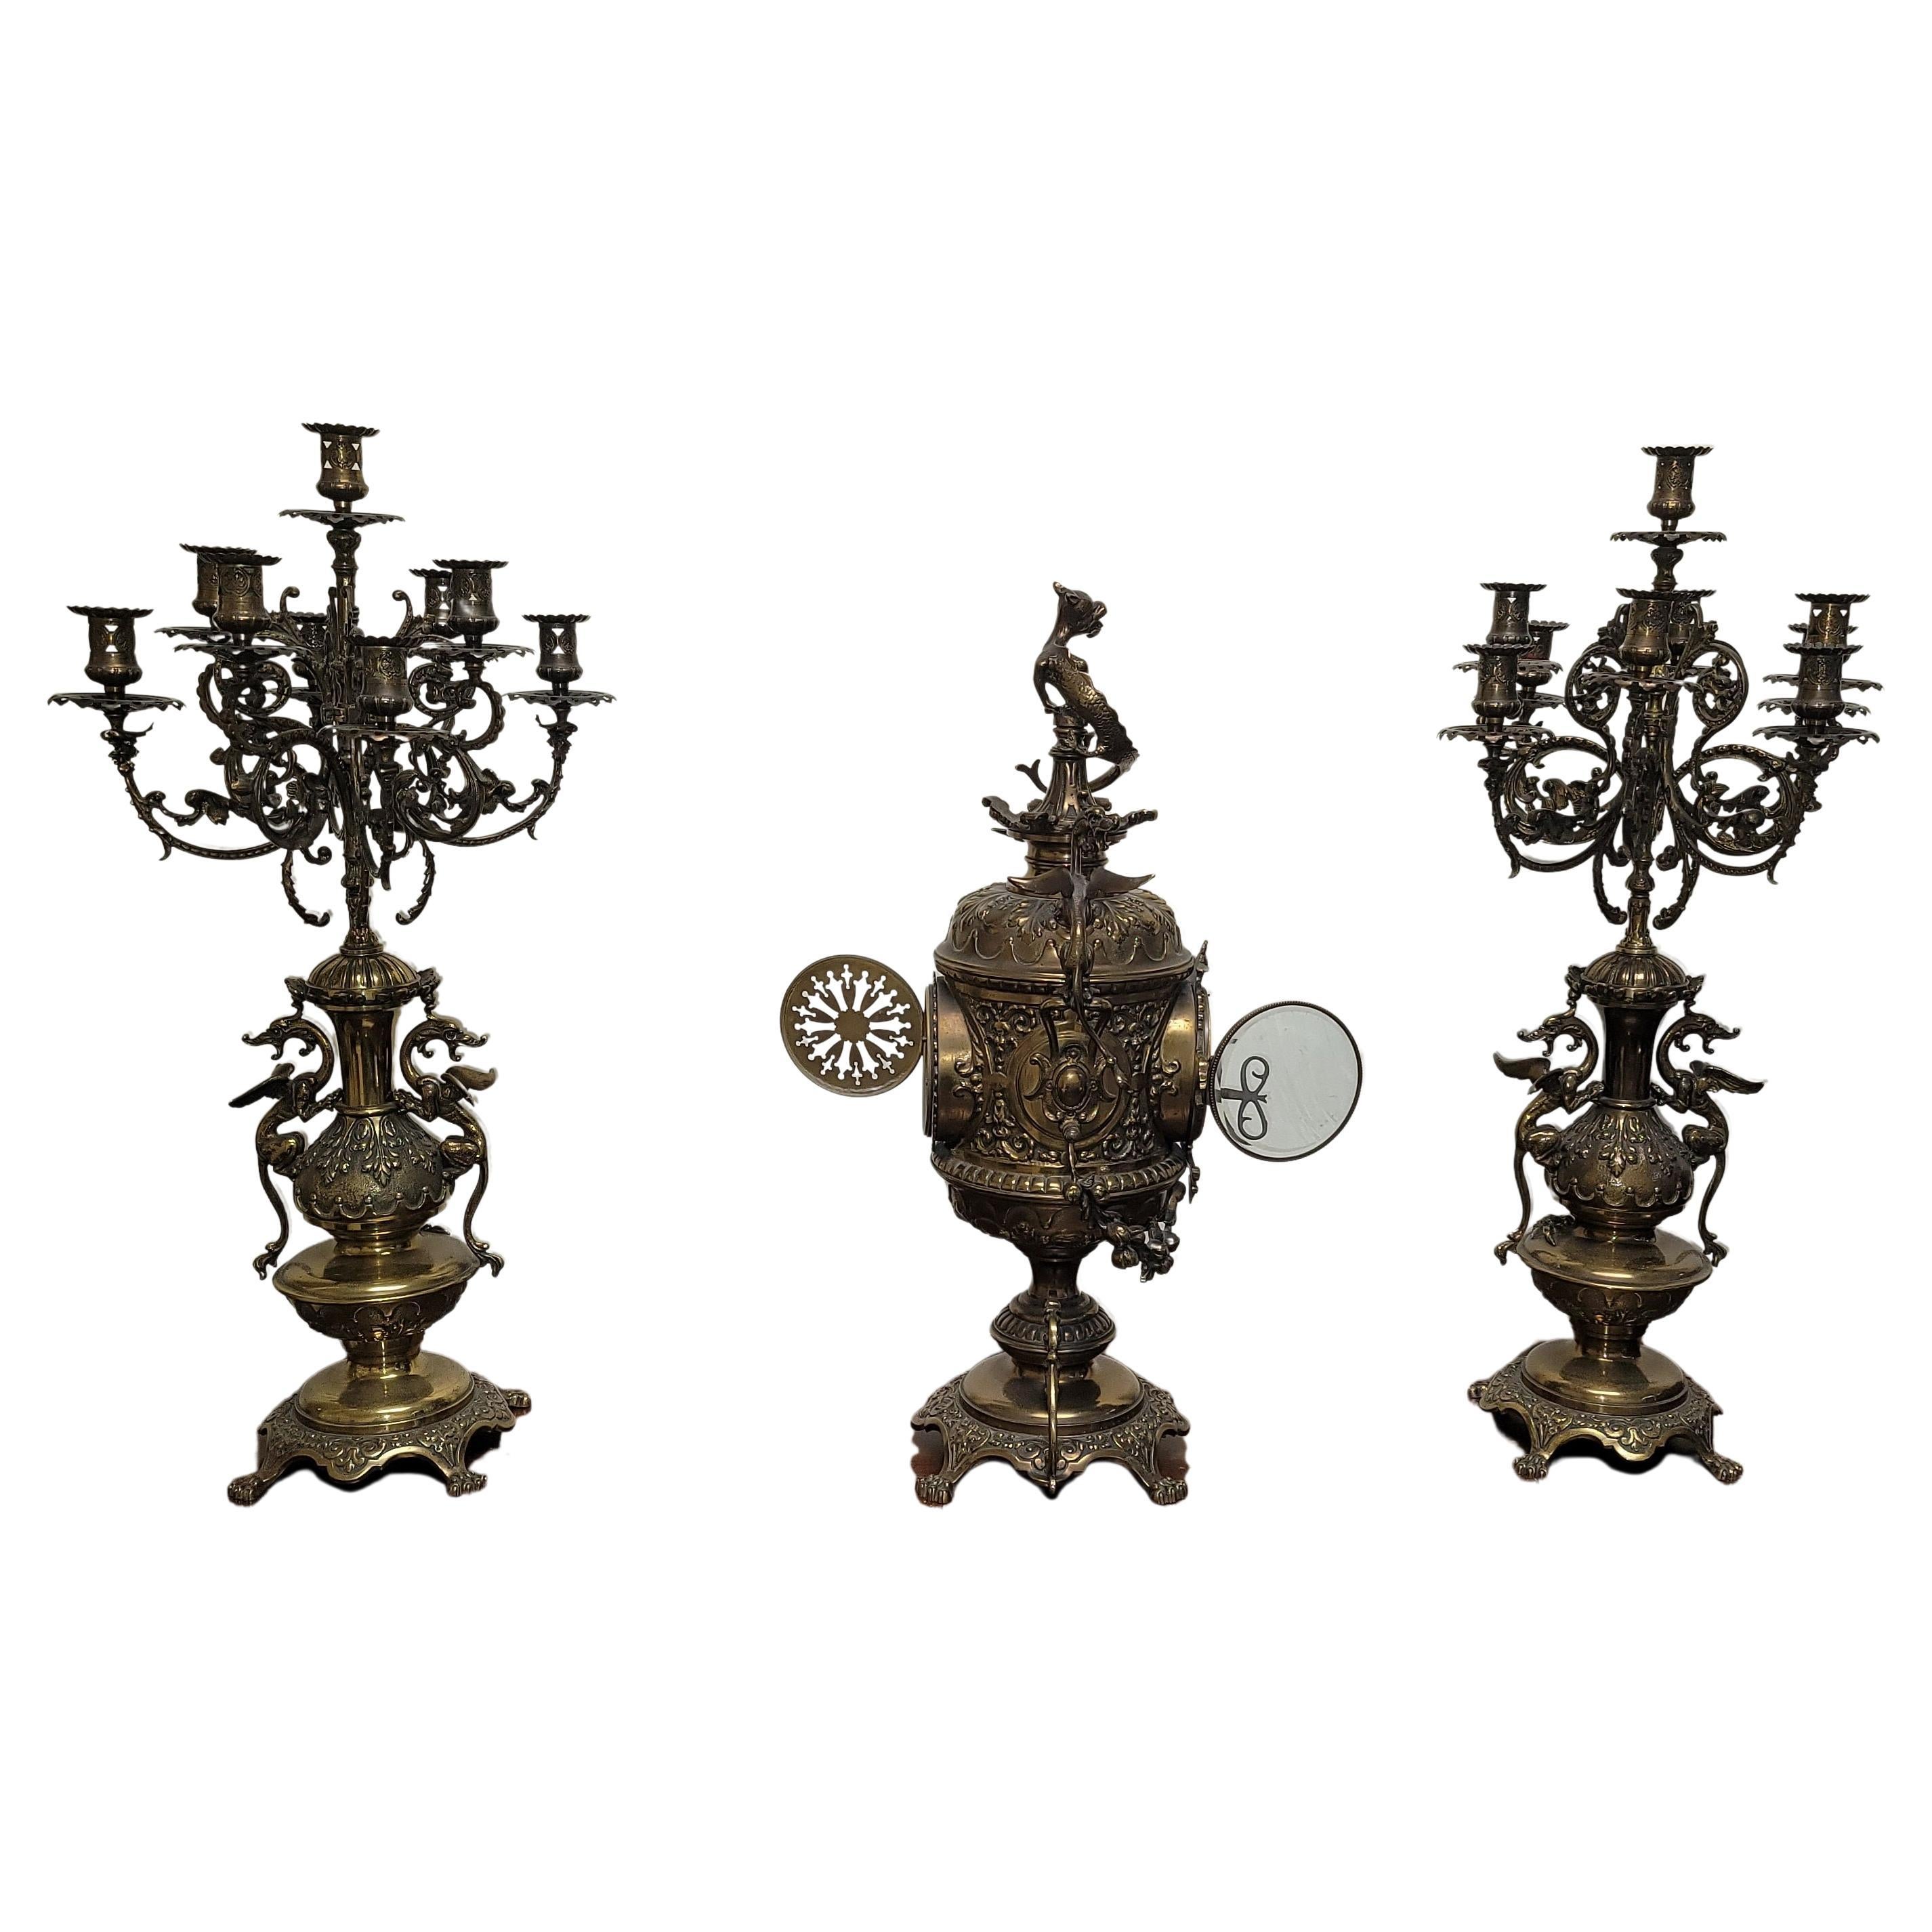 Belle Epoque Belgian Empire style Gilt Metal Three-Piece candelabras and Clock Garniture set with Asian inspiration. 
They measures 11